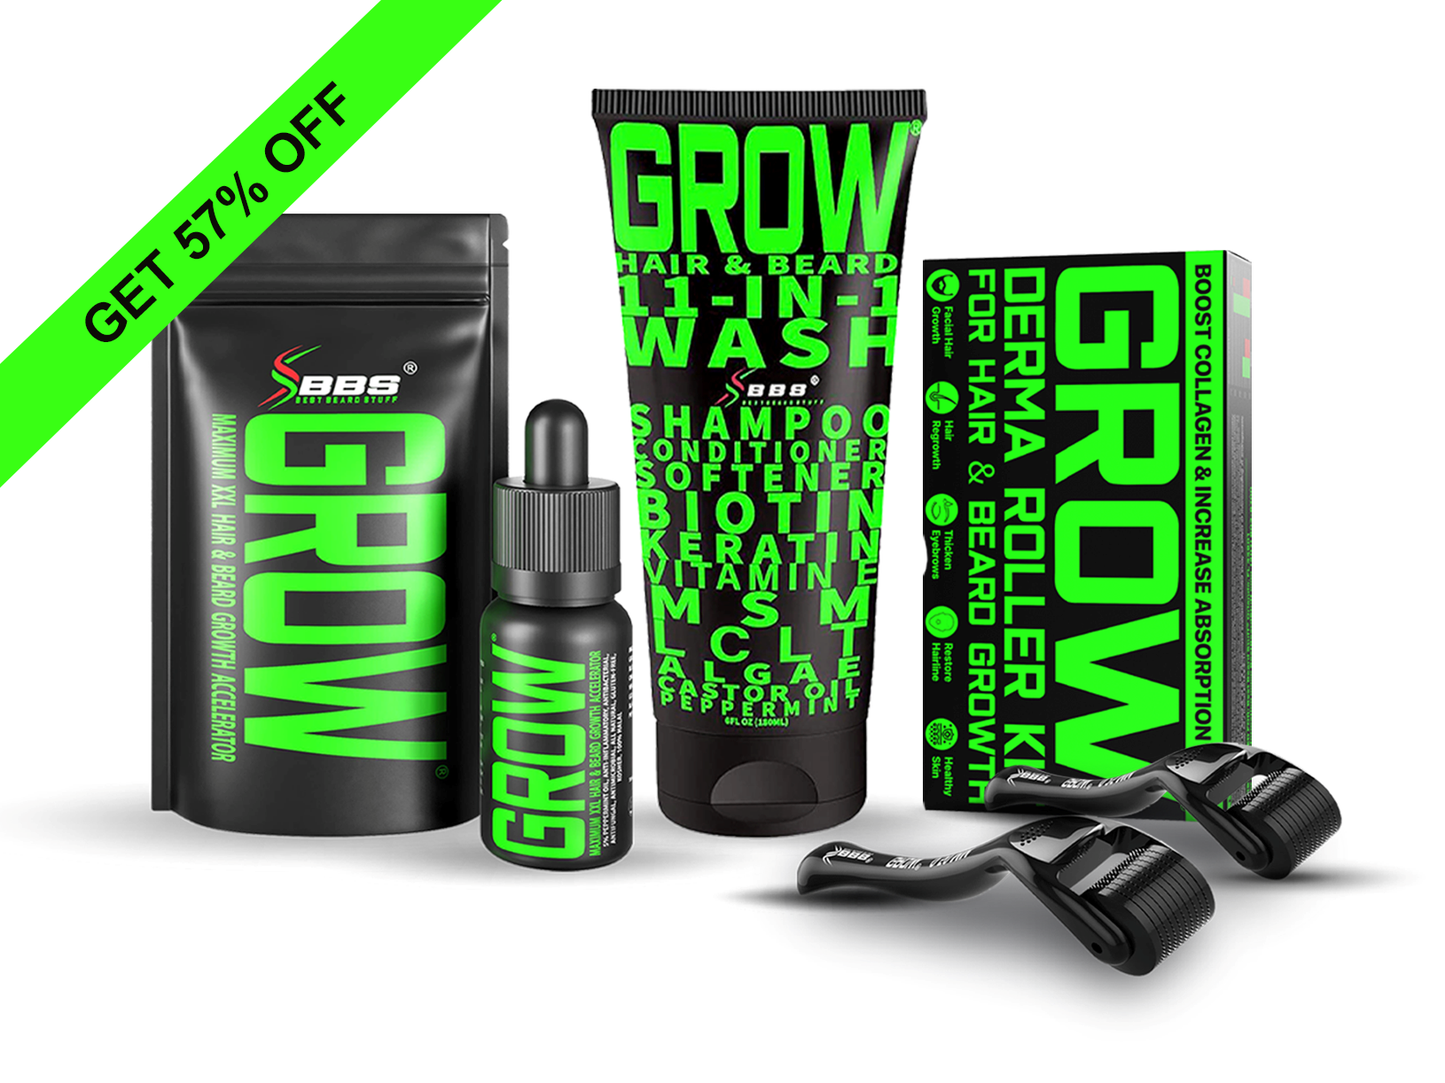 SPECIAL OFFER! GROW® Hair & Beard 11-in-1 Wash Growth Kit Upgrade